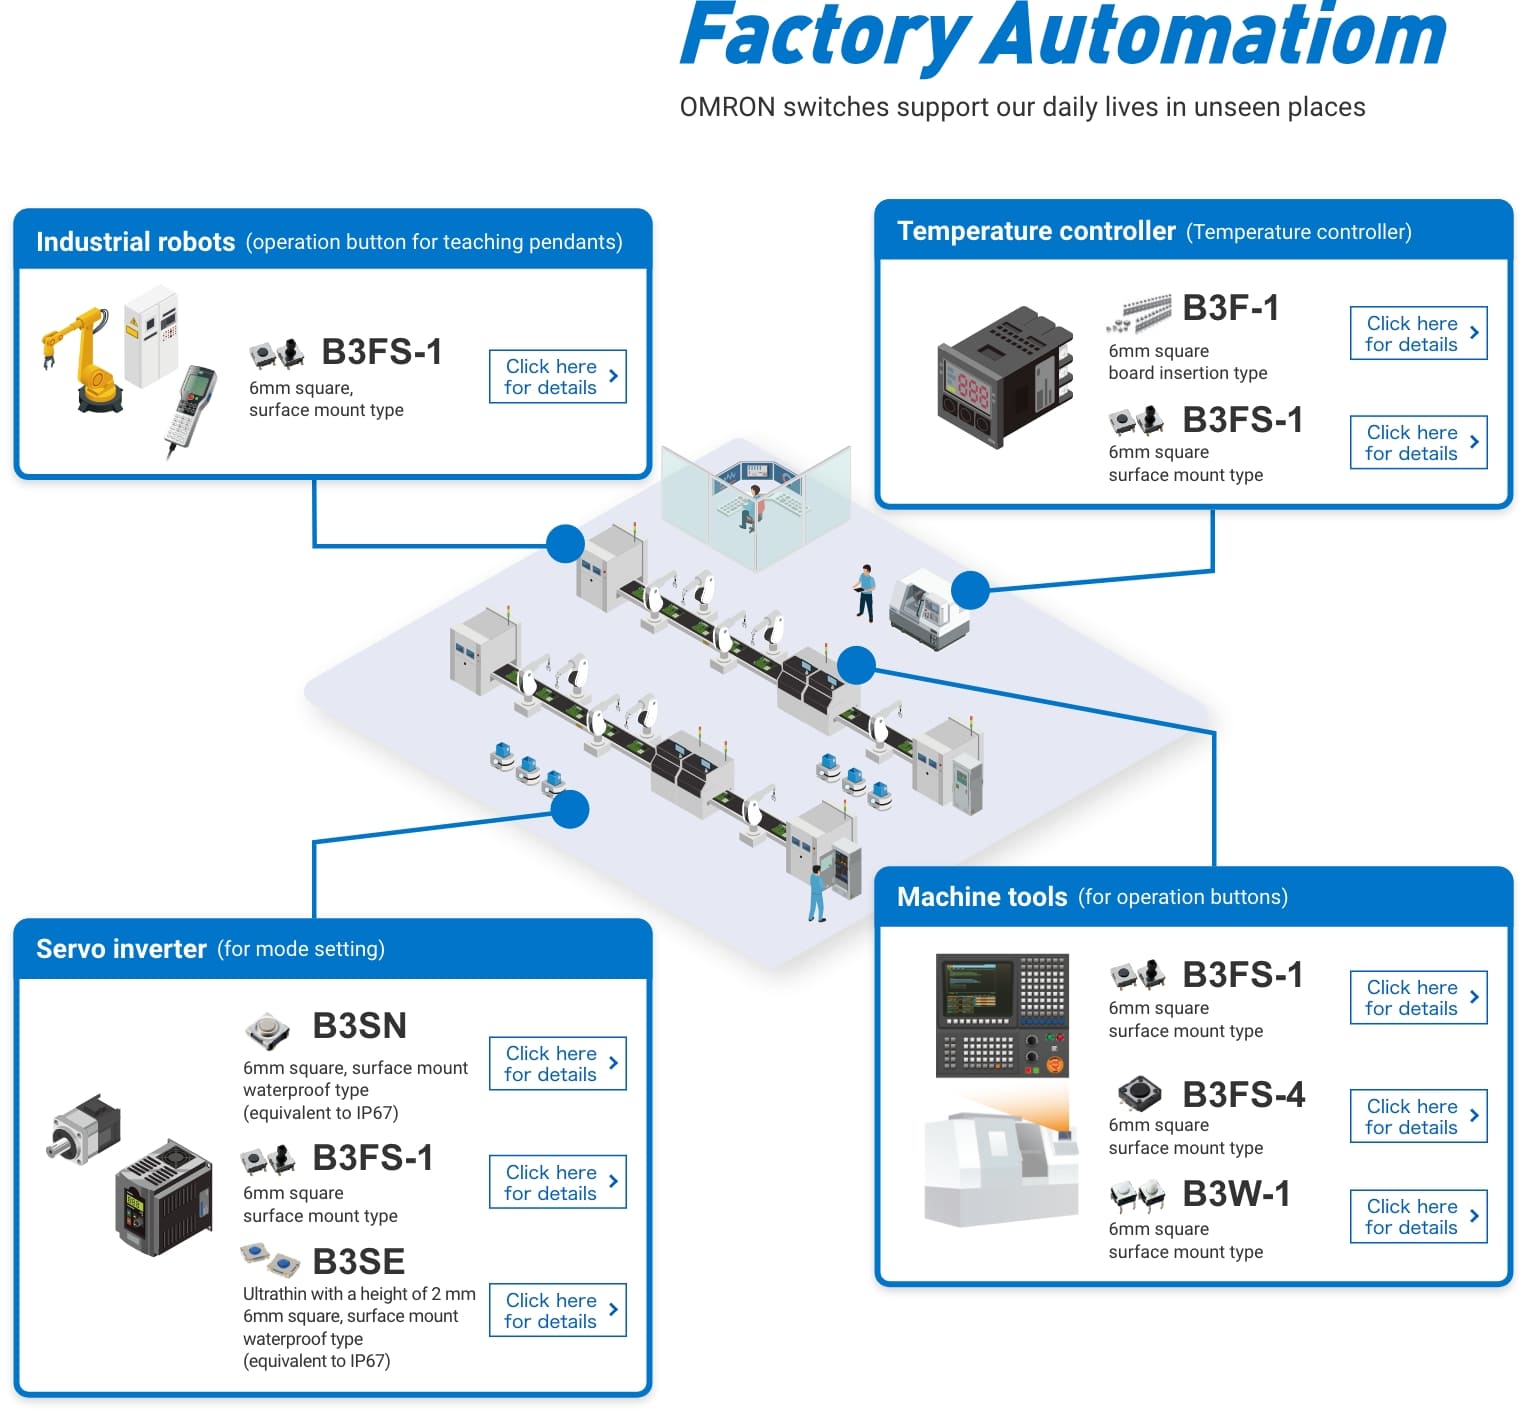 Factory Automation OMRON switches support our daily lives in unseen places Industrial robots (operation button for teaching pendants) B3FS-1:6mm square, surface mount type Servo inverter (for mode setting) B3SN:6mm square, surface mount waterproof type (equivalent to IP67) B3FS-1:6mm square surface mount type B3SE:Ultrathin with a height of 2 mm 6mm square, surface mount waterproof type (equivalent to IP67) Temperature controller(Temperature controller) B3F-1:6mm square board insertion type B3FS-1:6mm square surface mount type Machine tools (for operation buttons) B3FS-1:6mm square surface mount type B3FS-4:6mm square surface mount type B3W-1:6mm square surface mount type